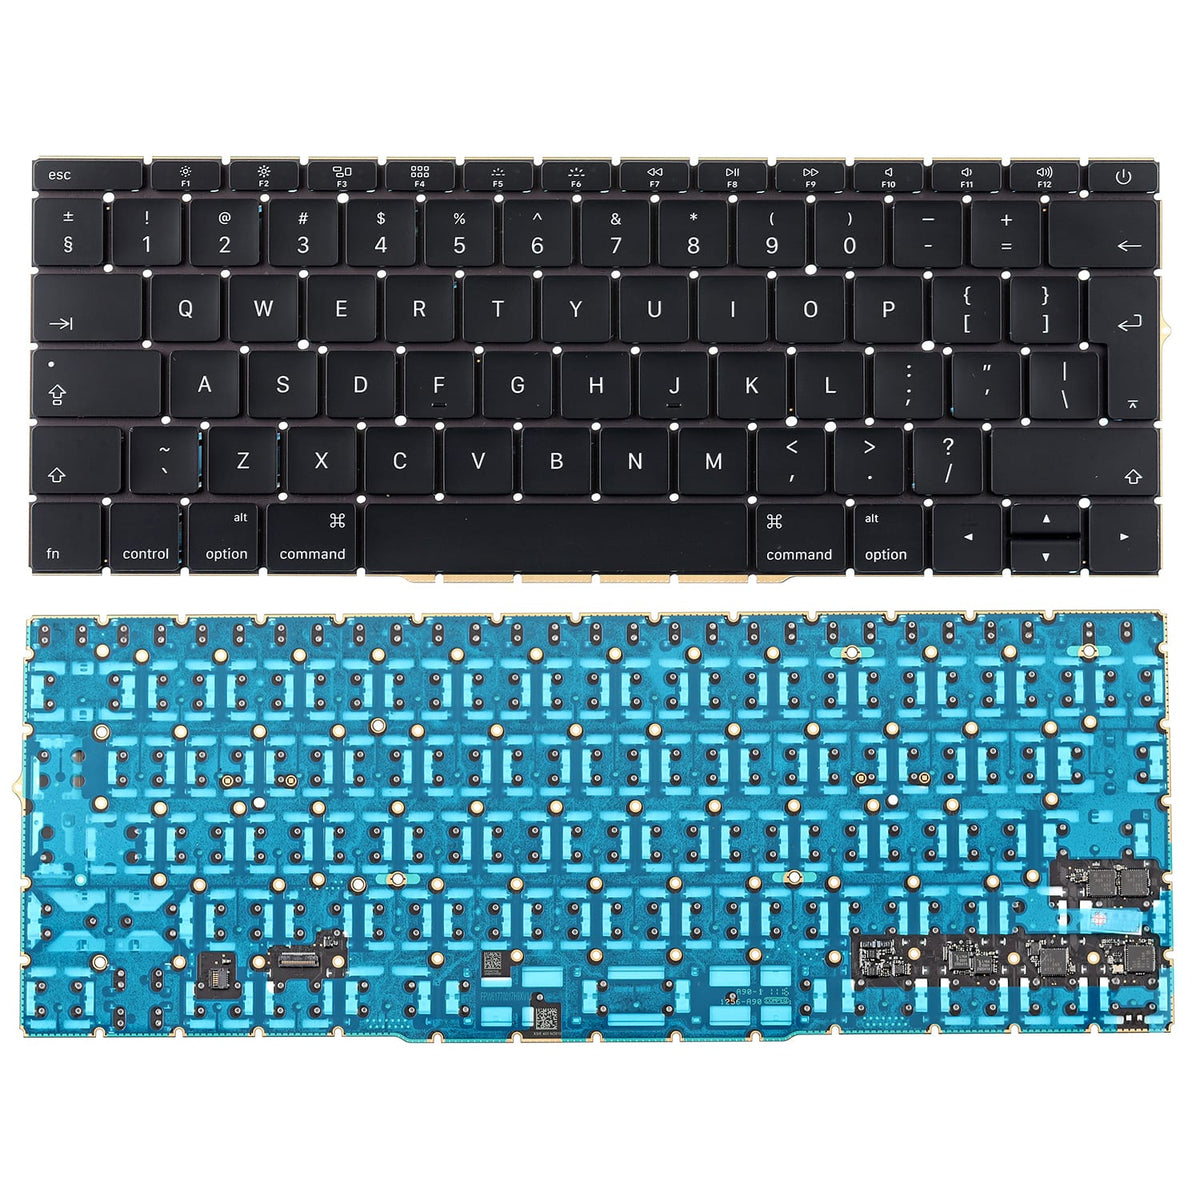 KEYBOARD(UK ENGLISH) FOR MACBOOK PRO 13" A1708 (LATE 2016 - MID 2017)